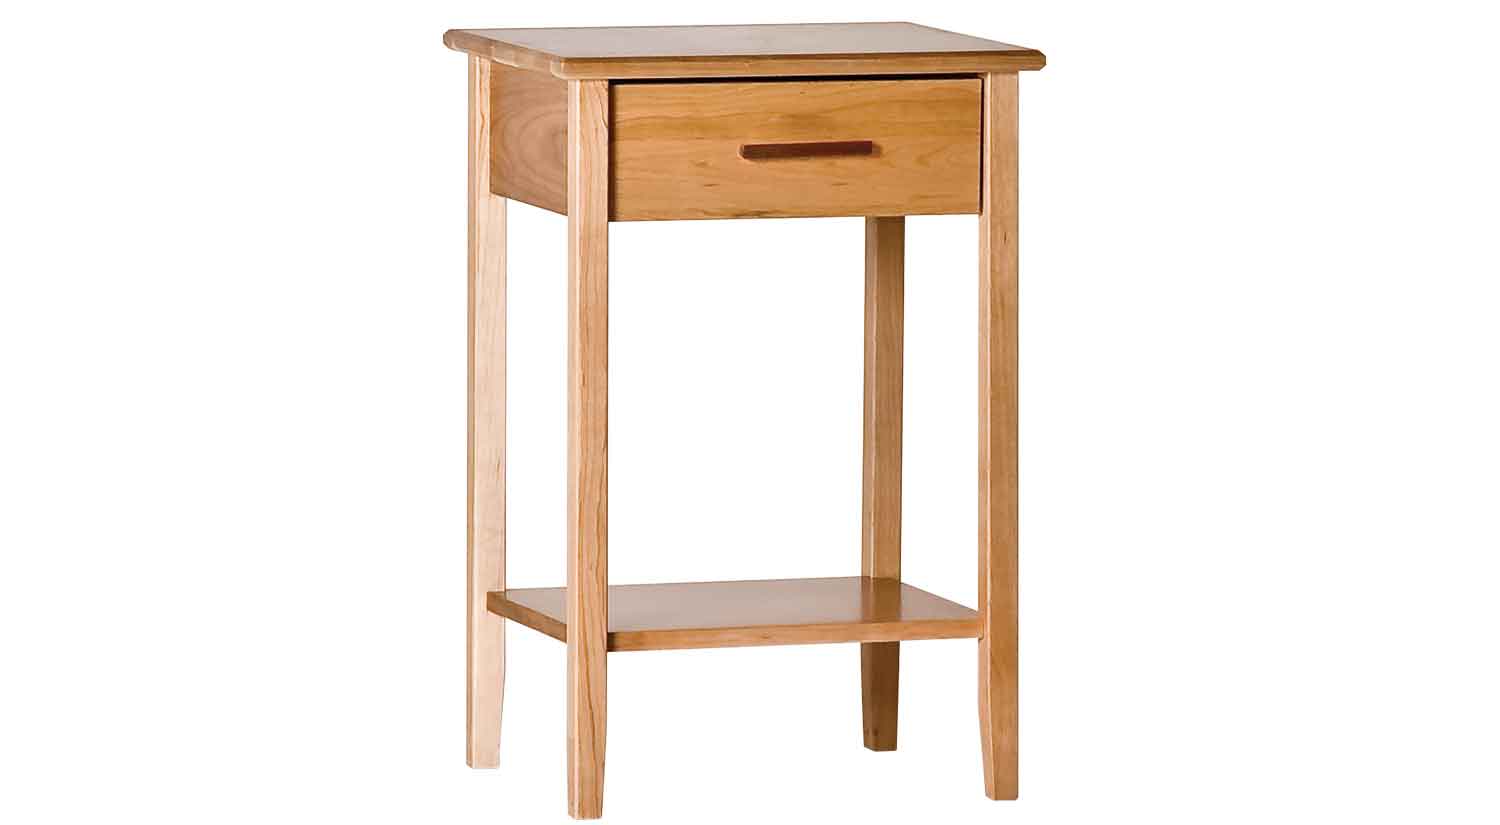 https://www.circlefurniture.com/userfiles/images/Products/wilton/Luna/Luna-Side-Tall-end-table.jpg